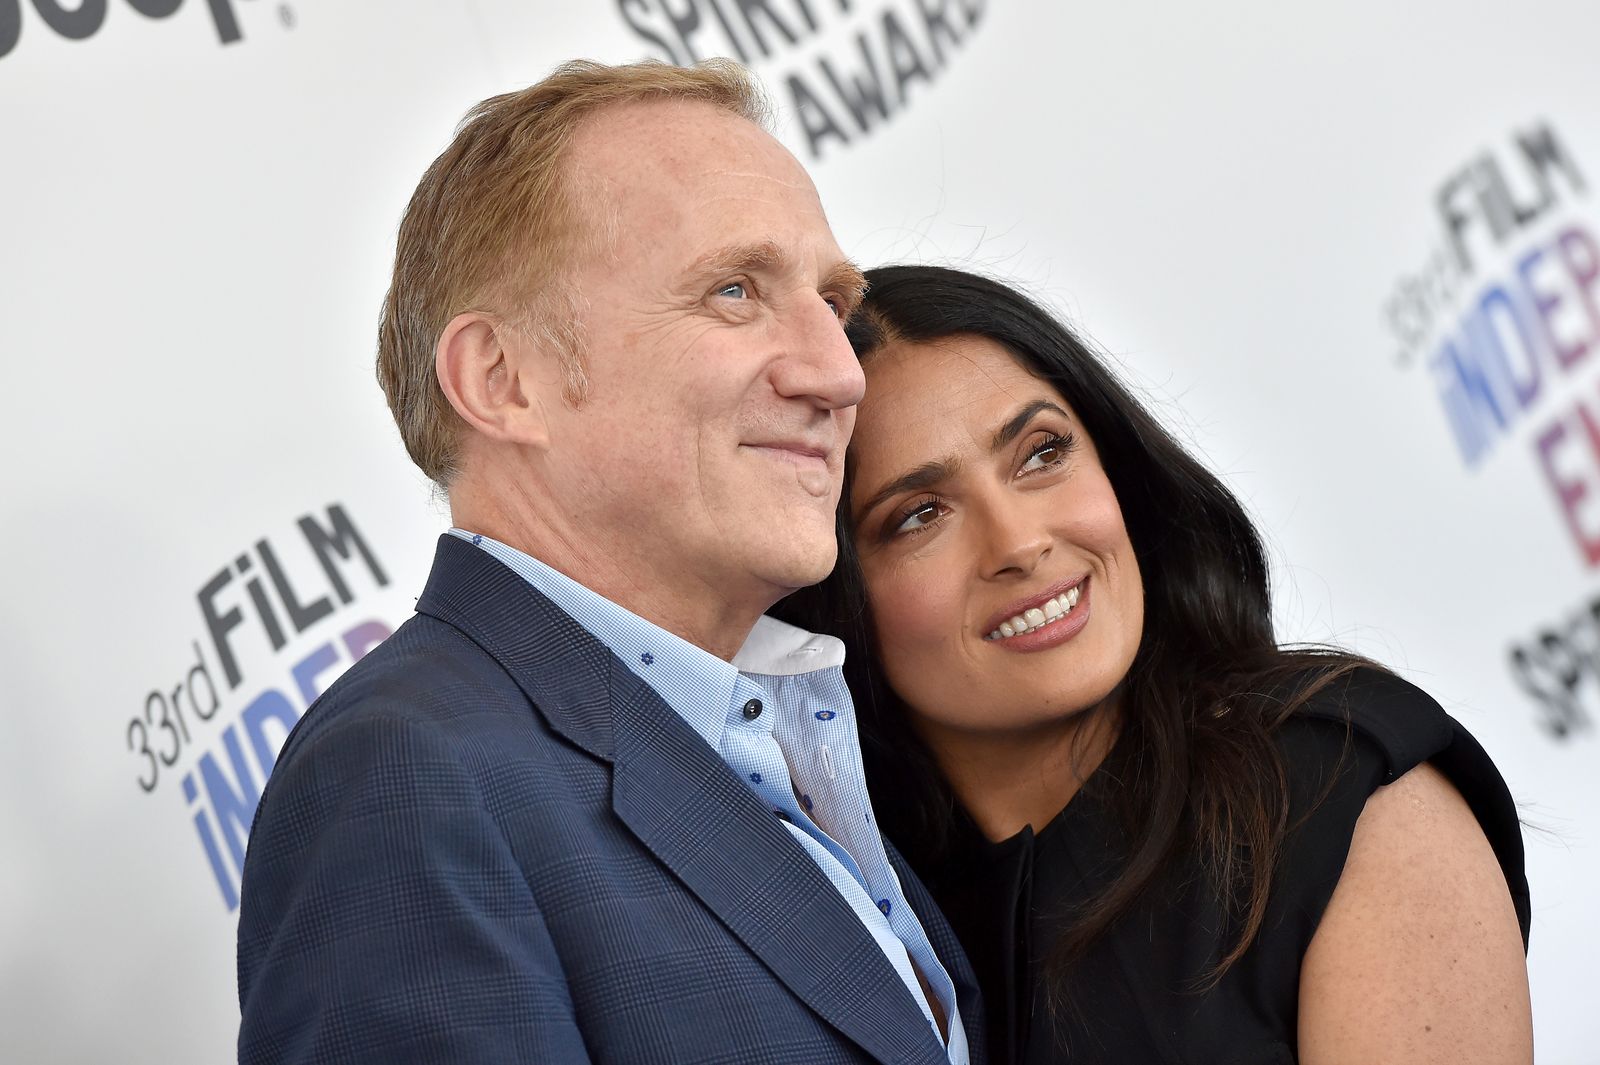 Francois-Henri Pinault and actress Salma Hayek at the Film Independent Spirit Awards on March 3, 2018, in Santa Monica, California | Photo: Axelle/Bauer-Griffin/FilmMagic/Getty Images